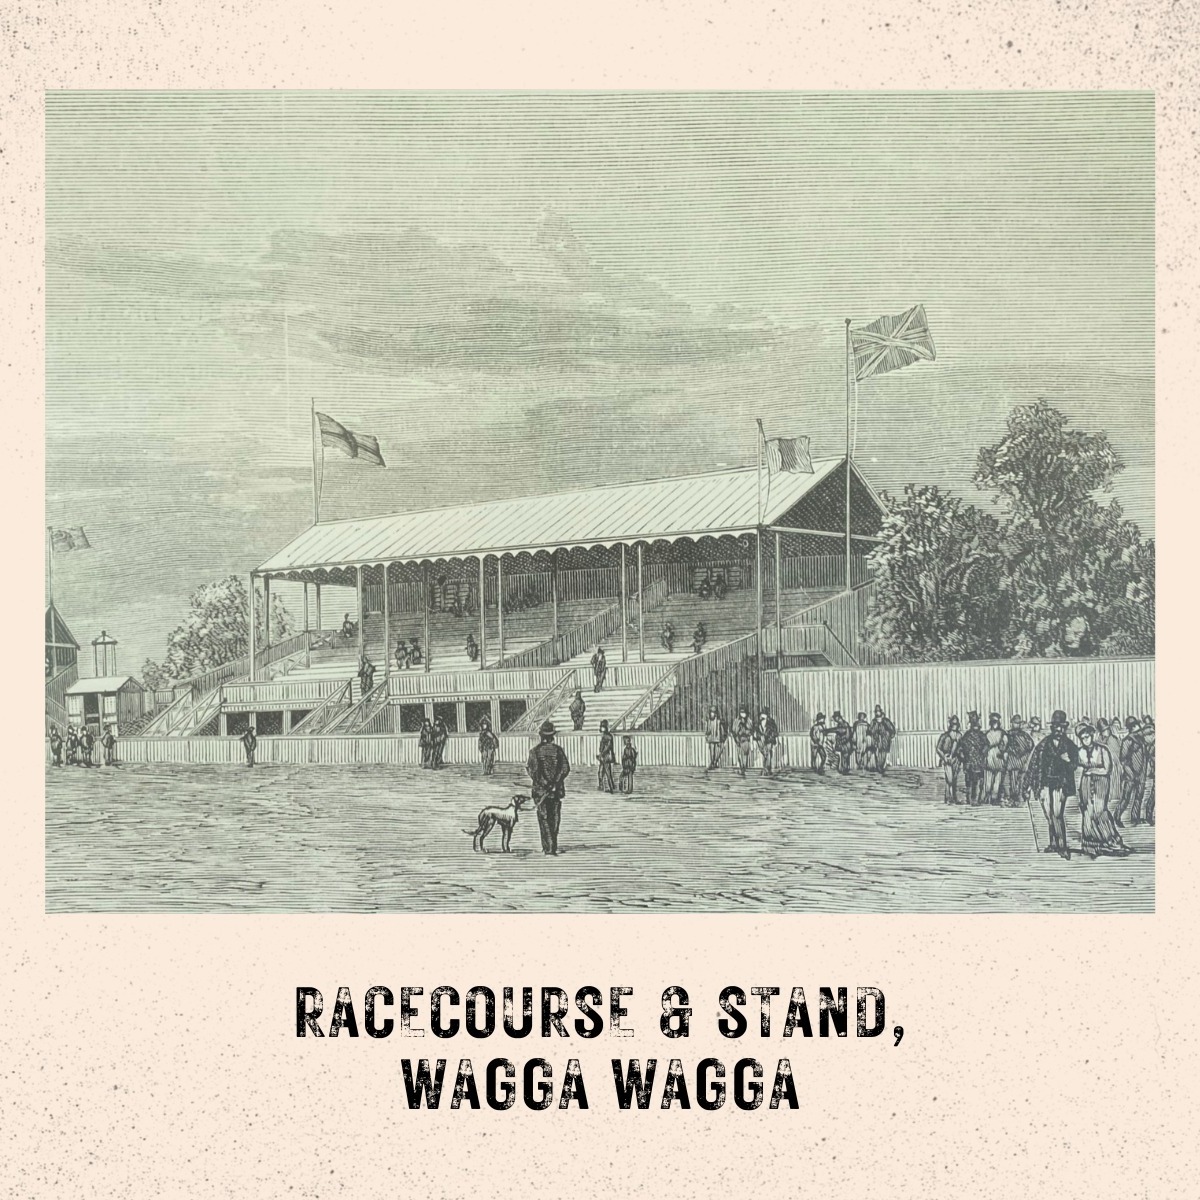 old line drawing of the racecourse and stand at Wagga